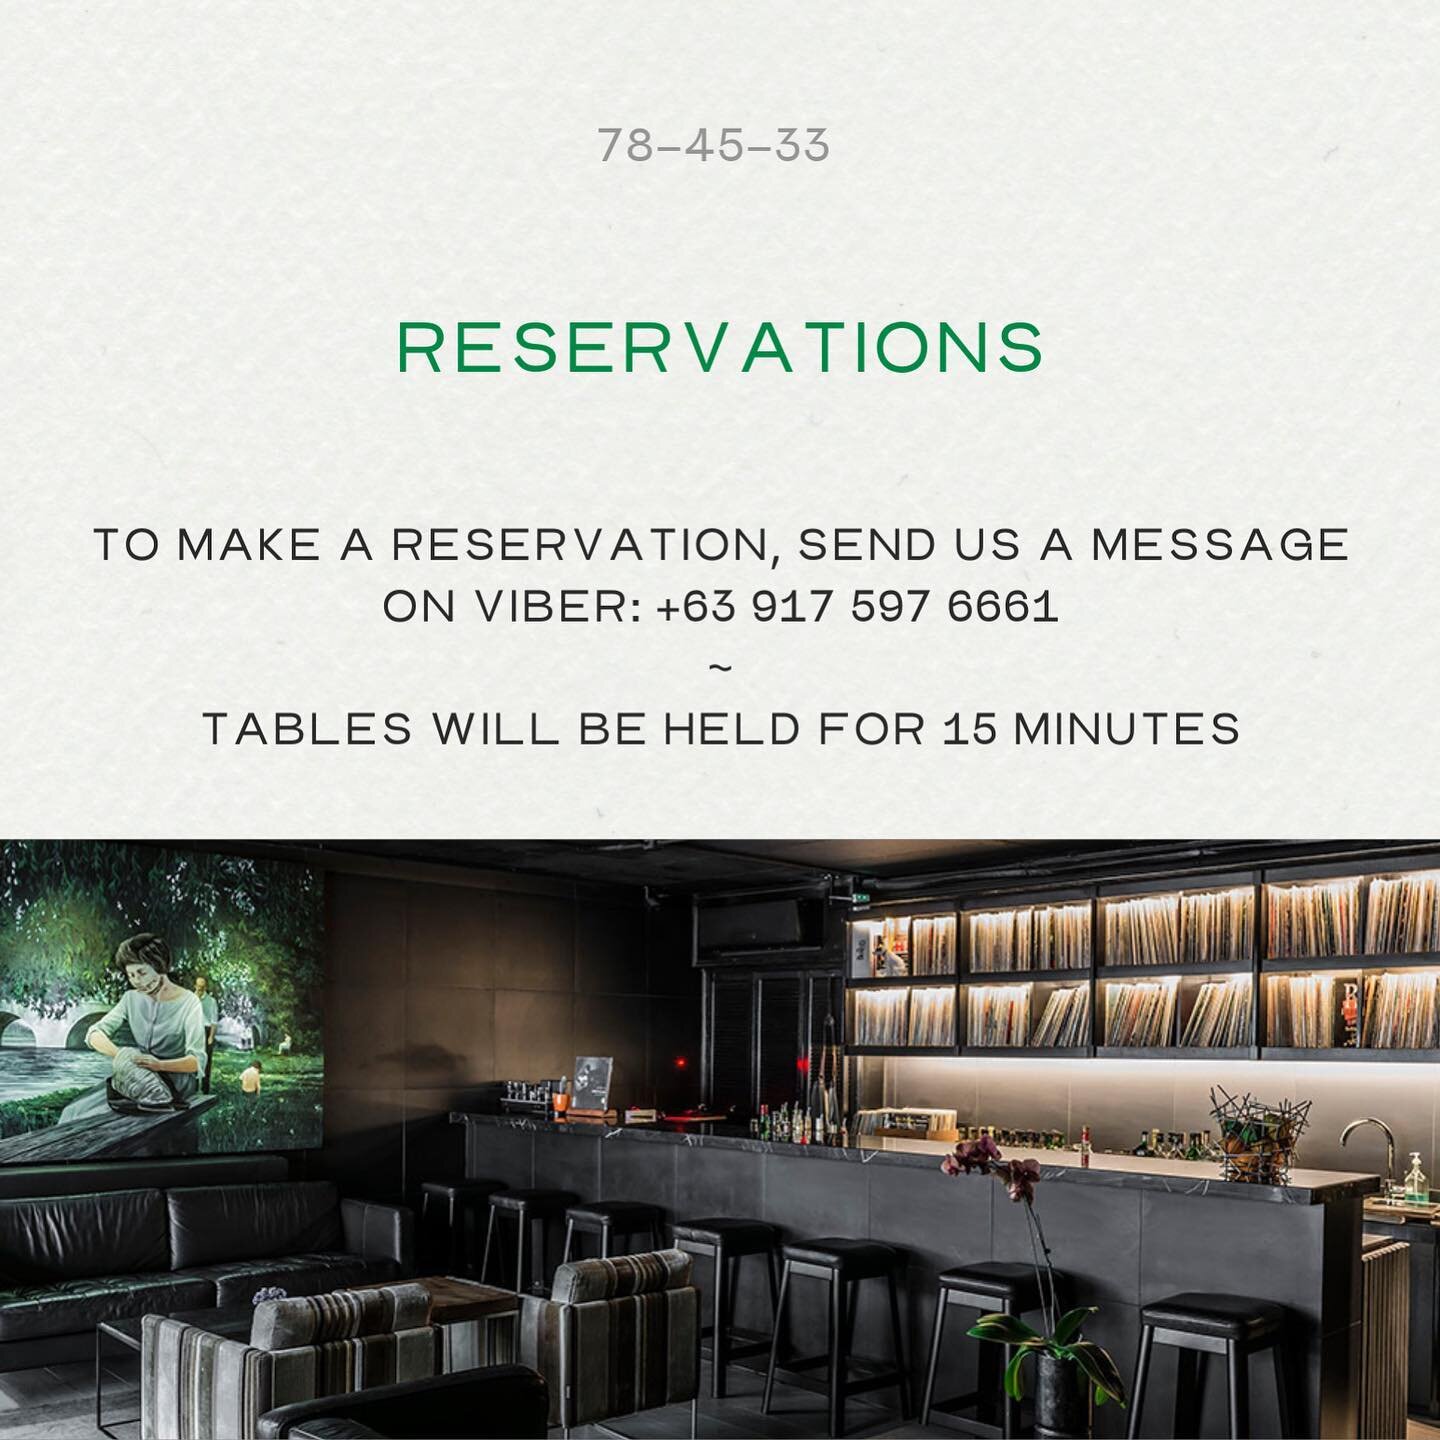 To make a reservation, send us a message on Viber: +63 917 597 6661. Tables will be held for 15 minutes.